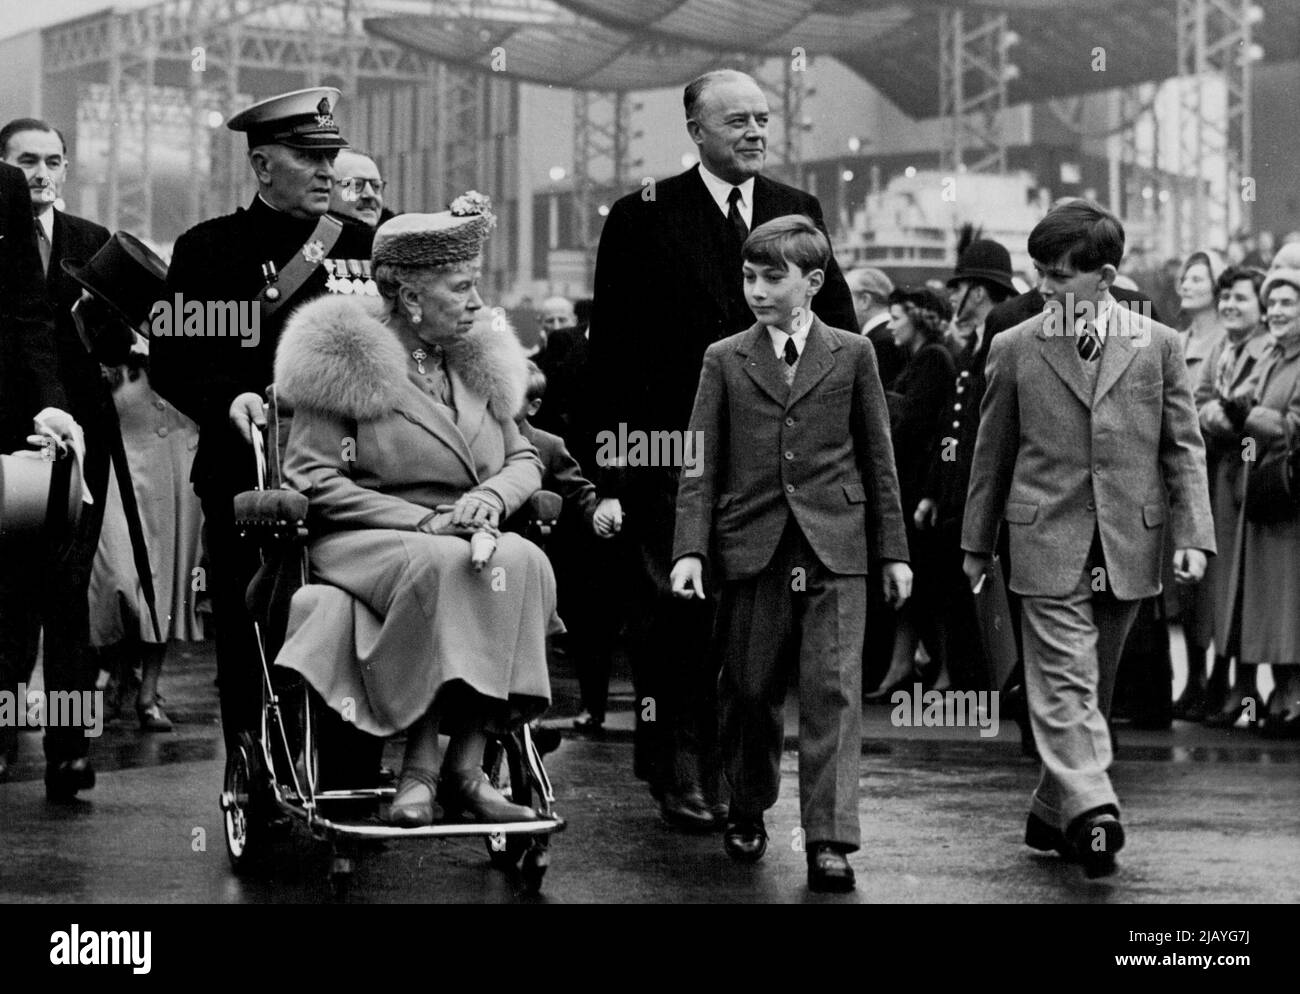 Royal Visit To South Bank Site -- Queen Mary chats with her grandchildren as she visits the Site in her wheel chair today. Prince Michael of Kent, Prince William of Gloucester. The King and Queen together with members of the Royal family today paid an official visit to the South bank Festival Site. May 5, 1951. (Photo by Fox Photos). Stock Photo